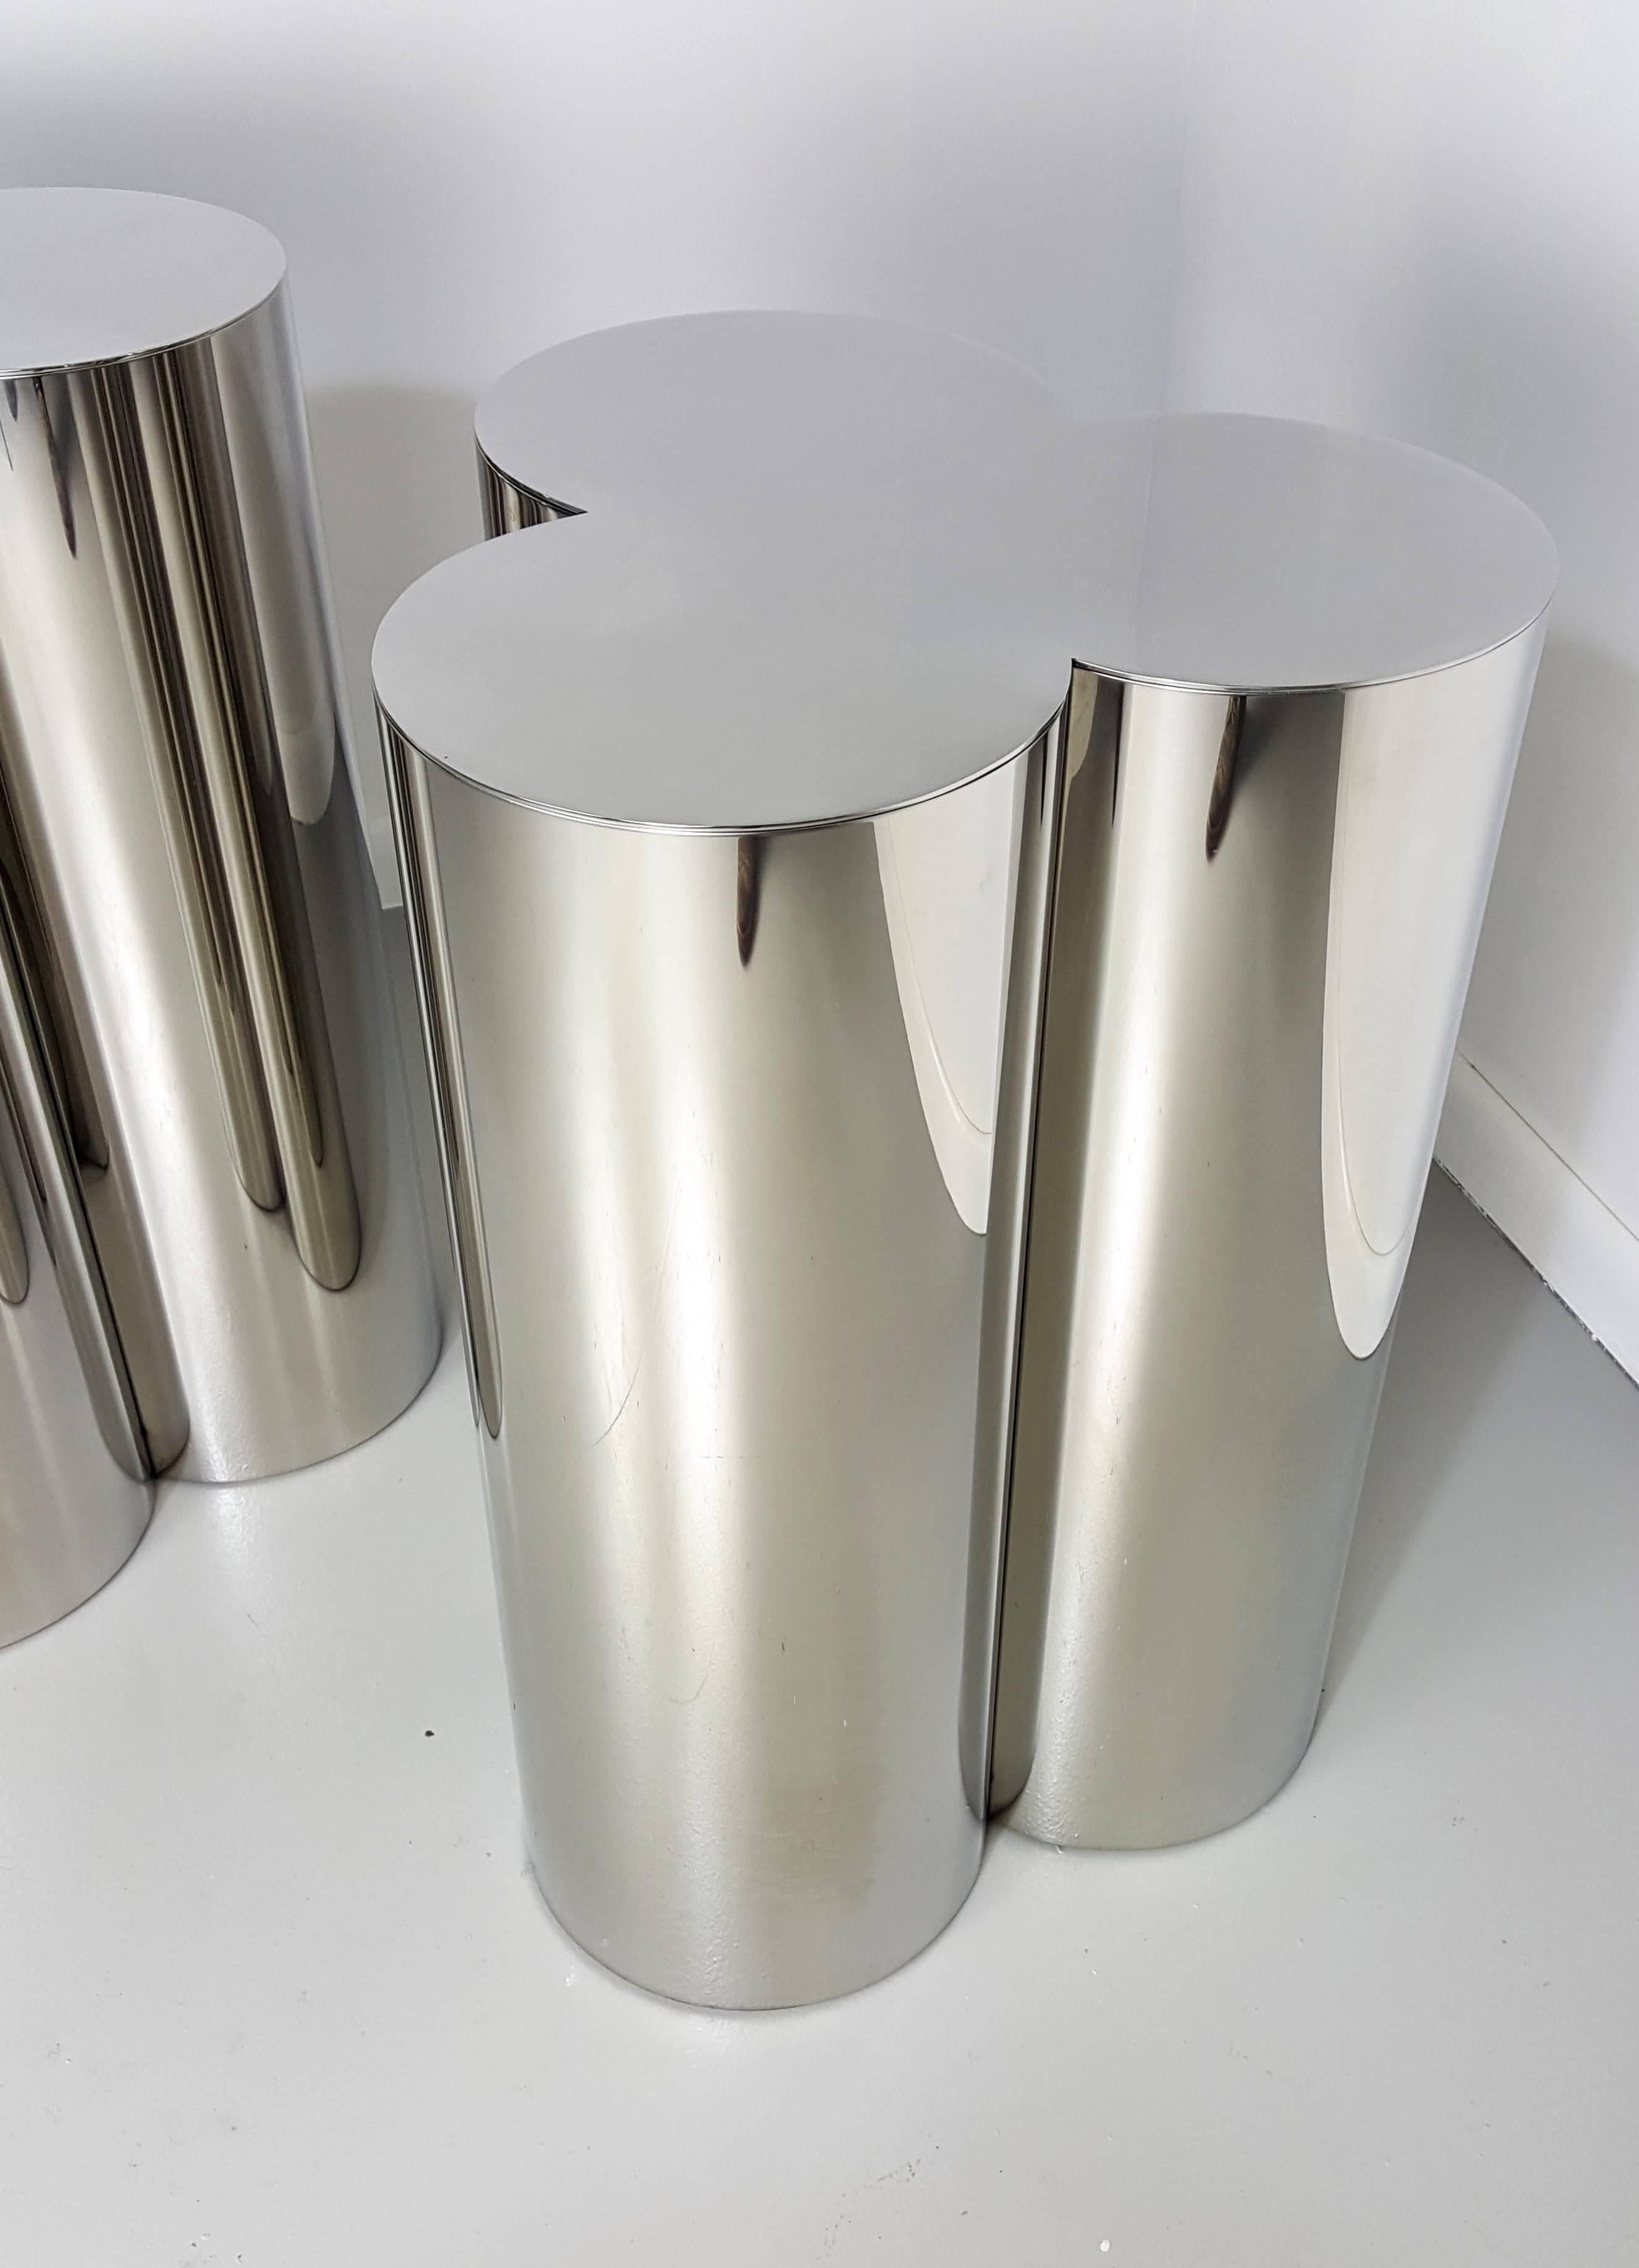 Custom Trefoil Dining Table Pedestal Bases in Mirror Polished Stainless Steel. The finish appears as chrome. This is a custom-made product that is also available in polished brass. These pedestals are Industrial quality and designed to support large